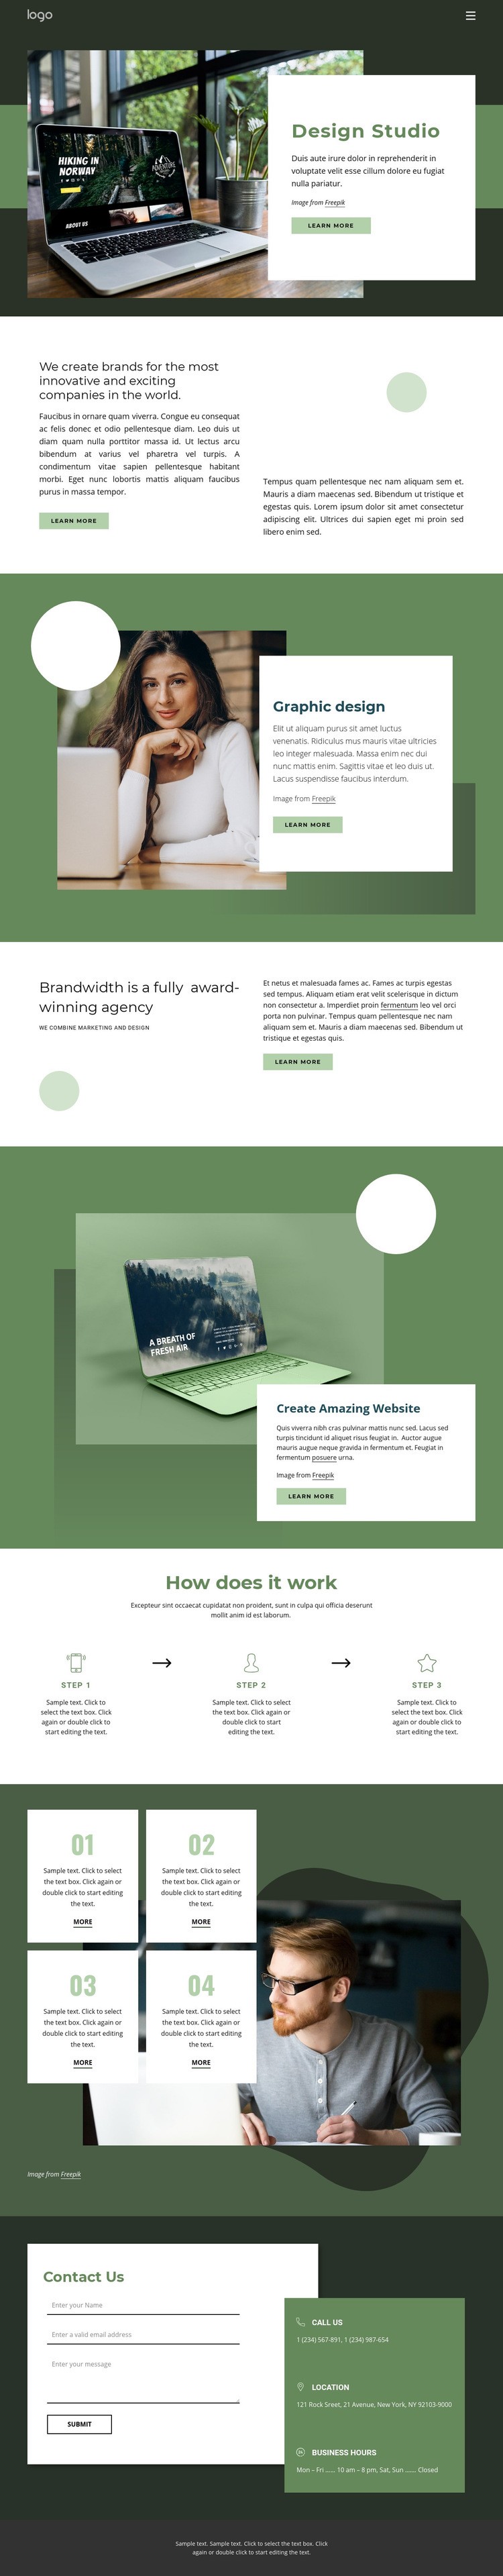 Design inspiration from nature Web Page Design